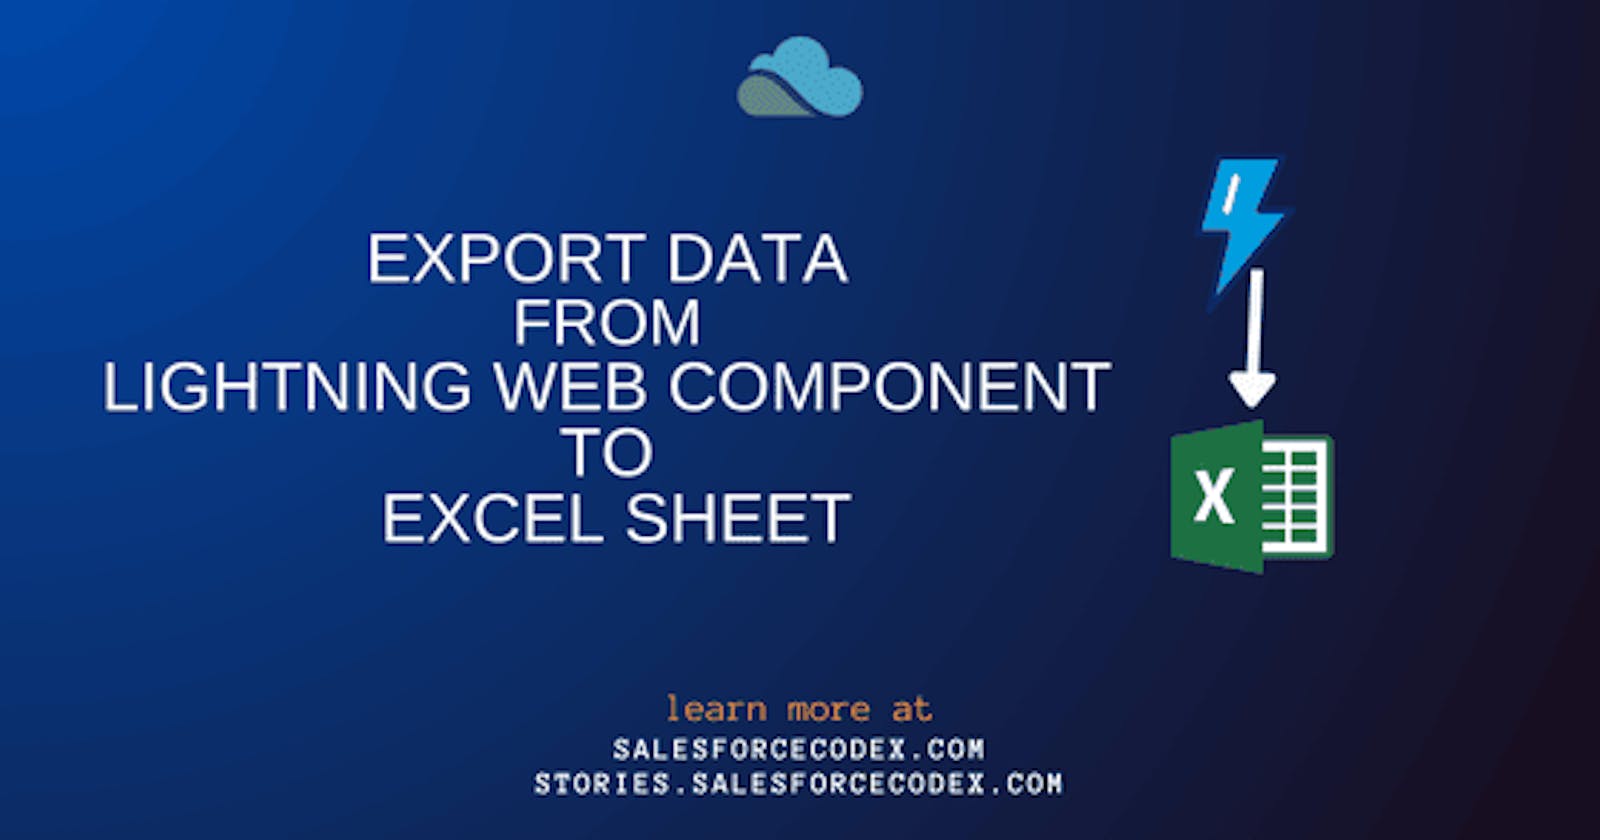 Export Data from Lightning Web Component to Excel Sheet